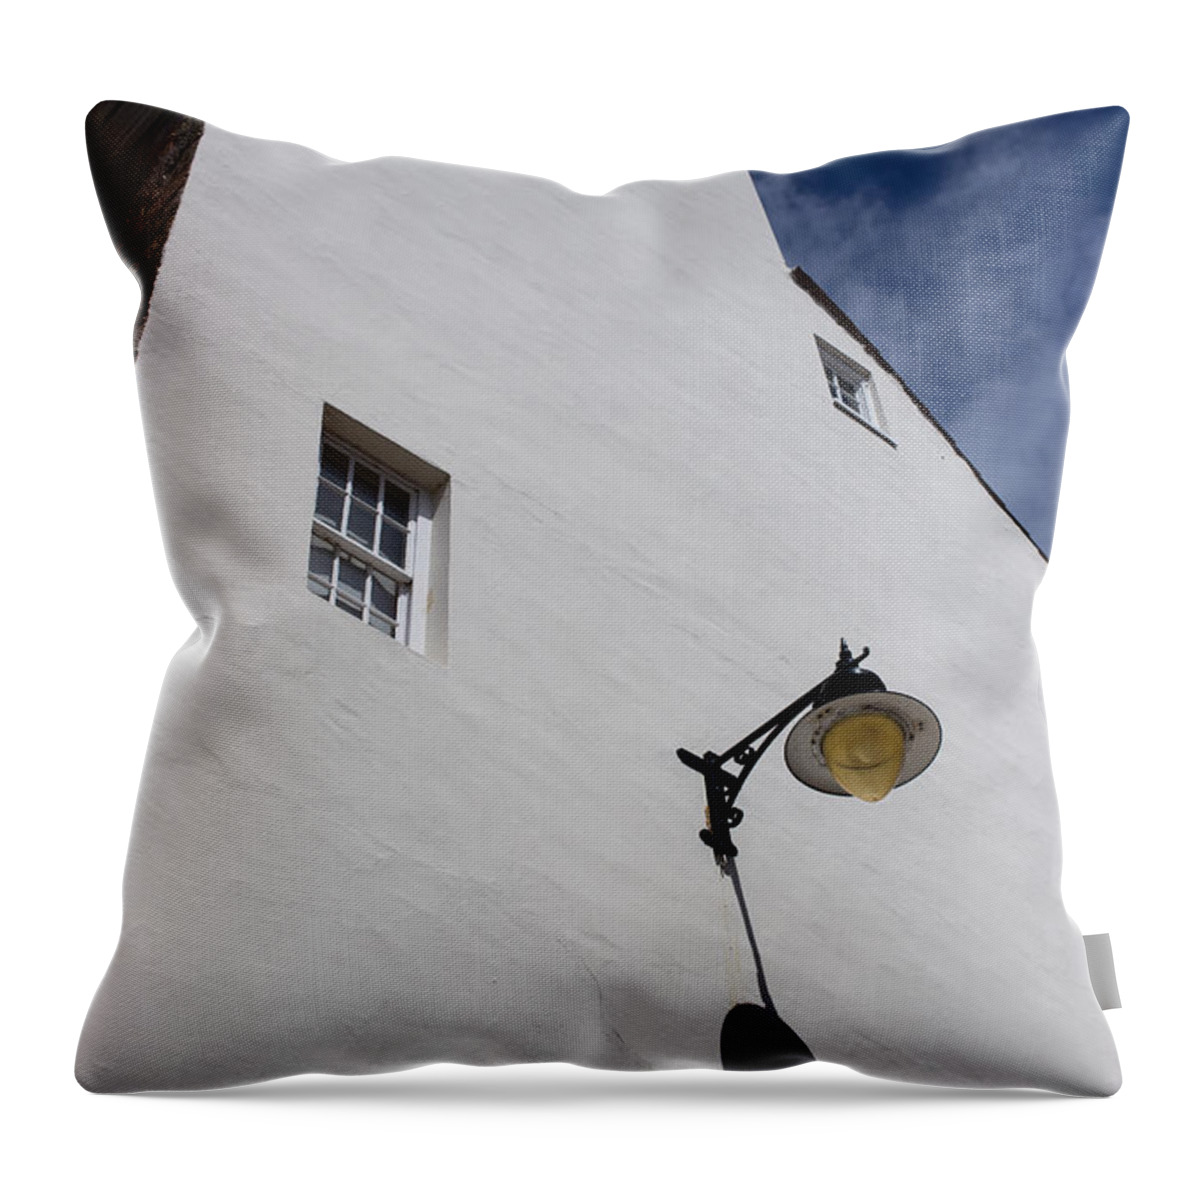 Street Lamp Throw Pillow featuring the photograph Street Lamp by Nigel R Bell